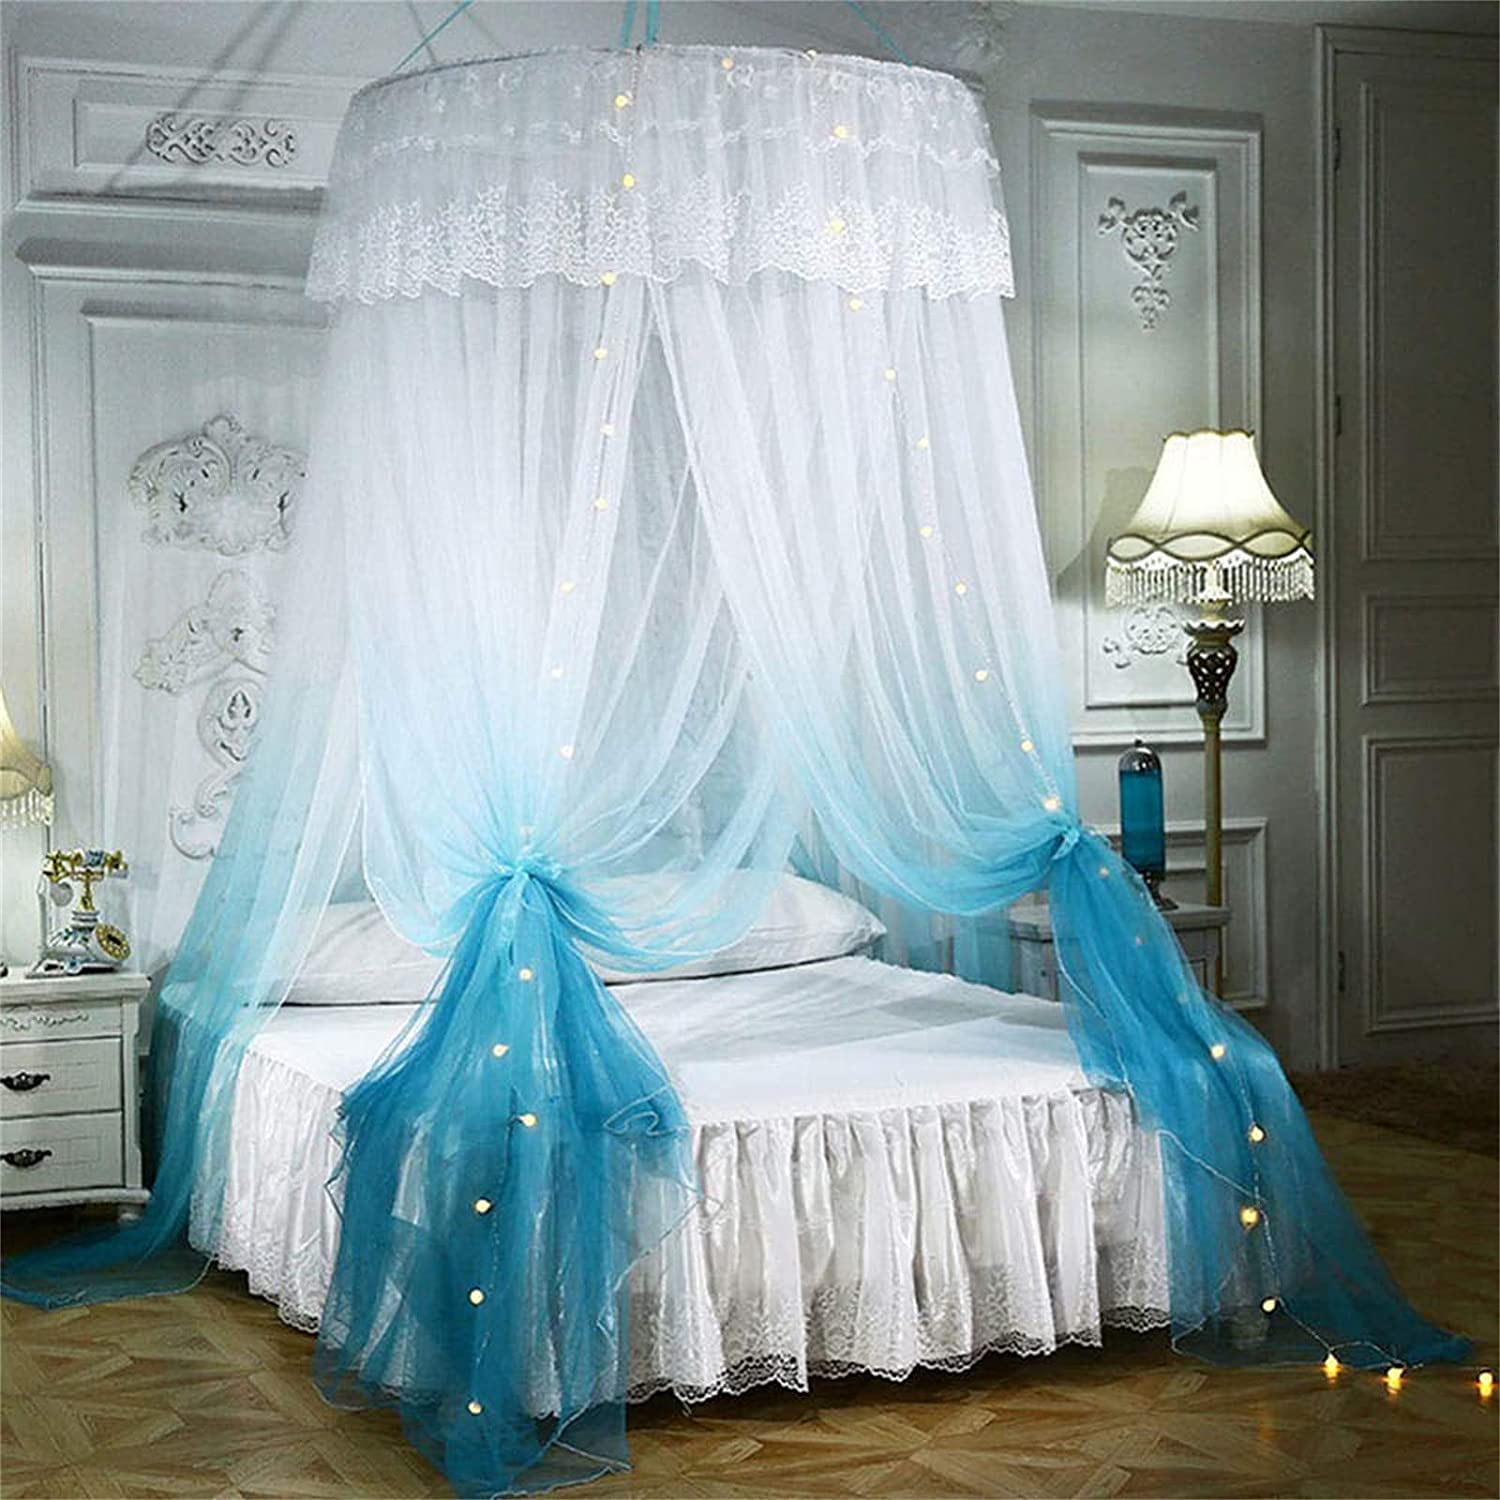 Pack Plastic 1 White Beautiful mosquito net canopy for single or double beds 